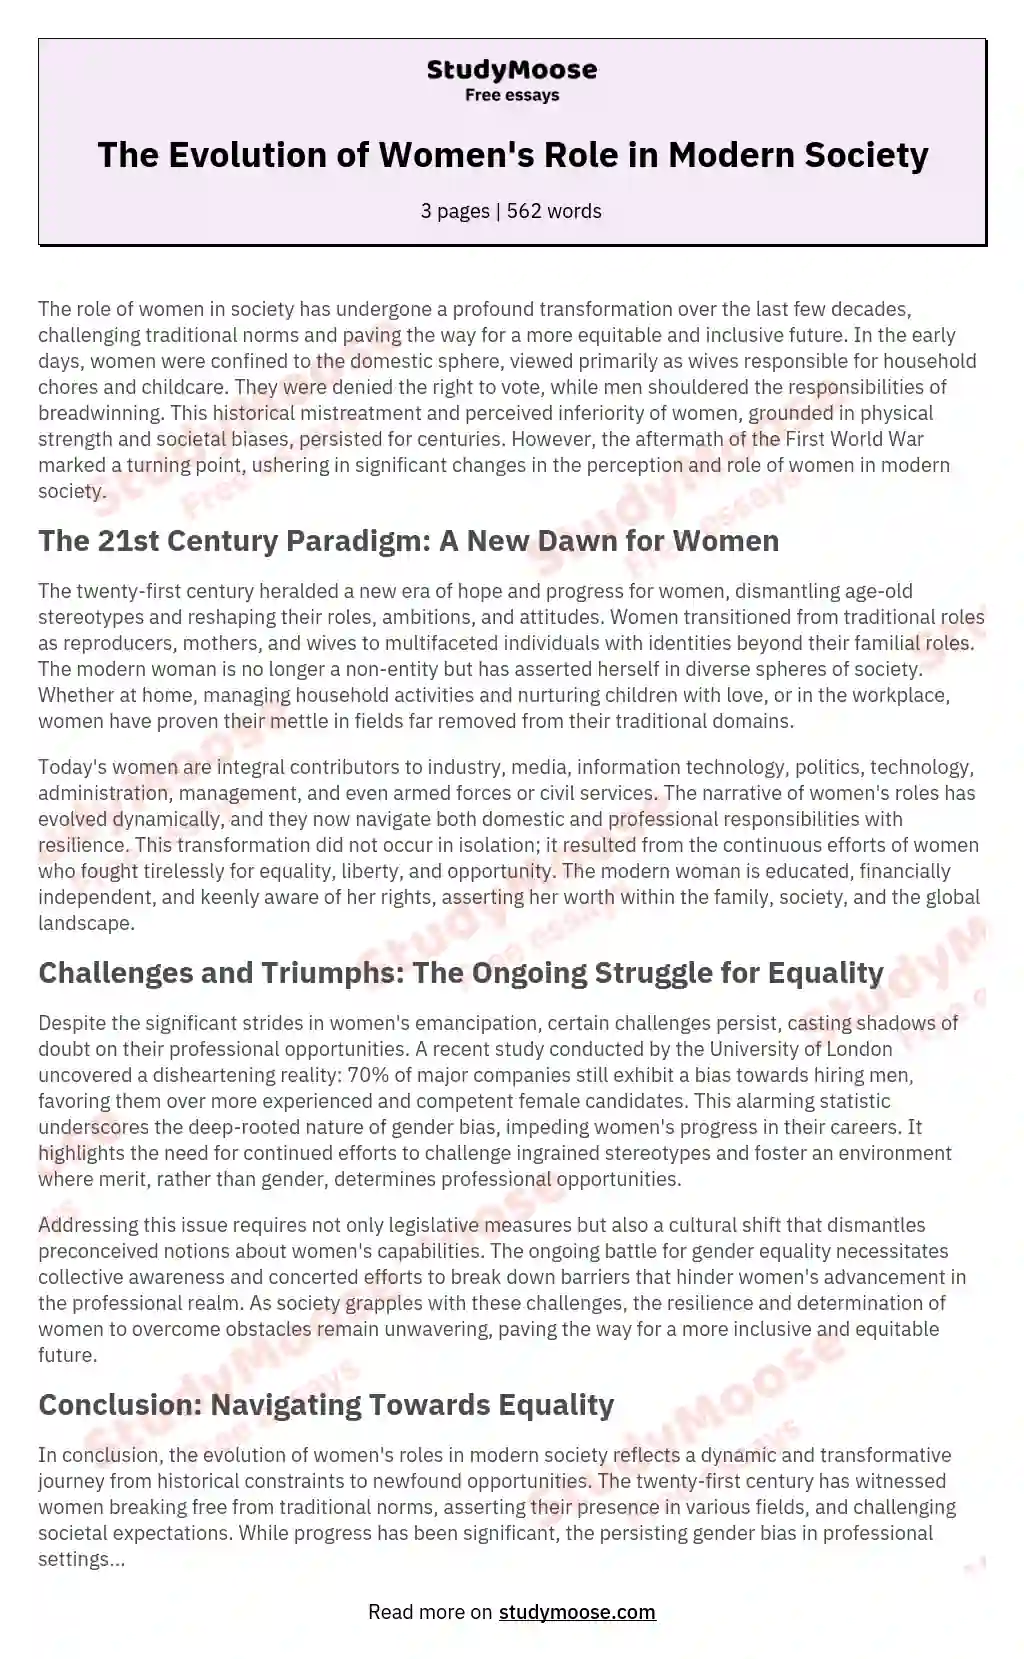 The Evolution of Women's Role in Modern Society essay